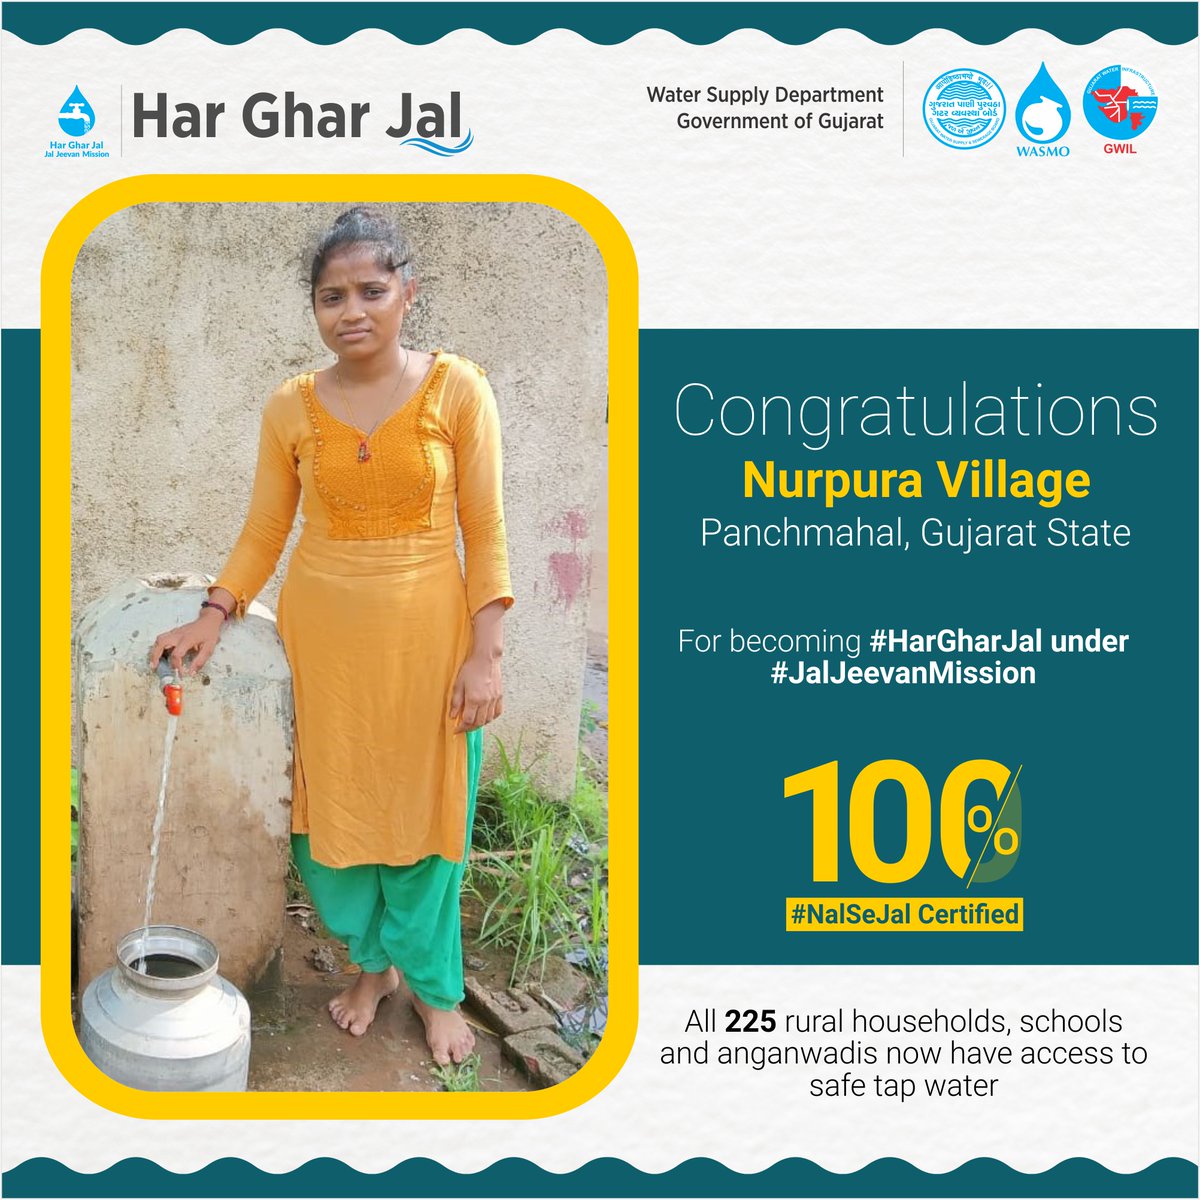 Congratulations to all the people of Nurpura Village of #Panchmahal, #Gujarat State, for becoming 100% #HarGharNalSeJal certified. All 225 rural households, schools and anganwadis are now getting safe tap water under #JalJeevanMission